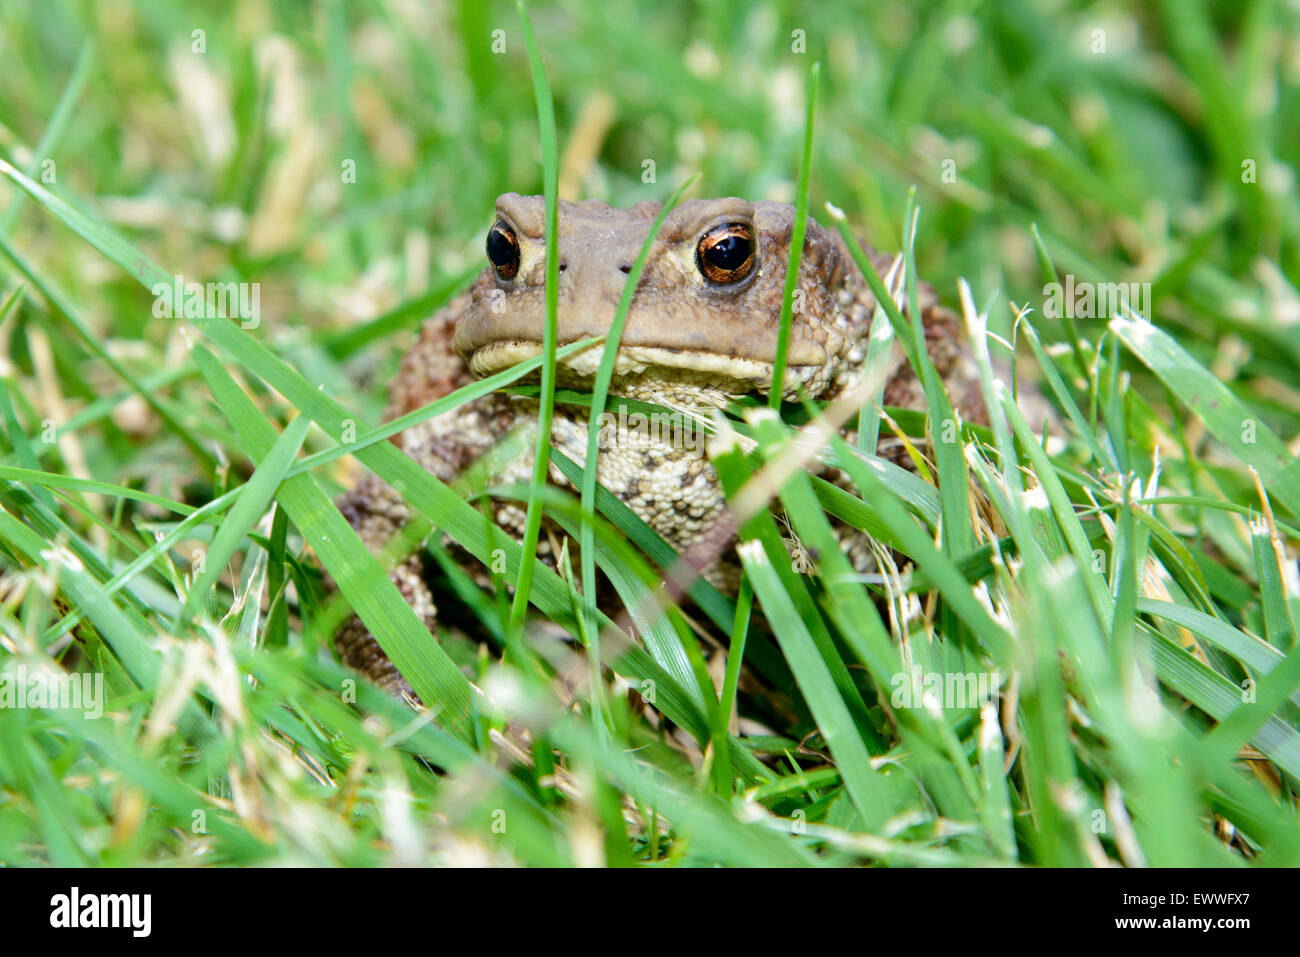 Closeup of an European common toad, bufo bufo, sitting in the grass Stock Photo